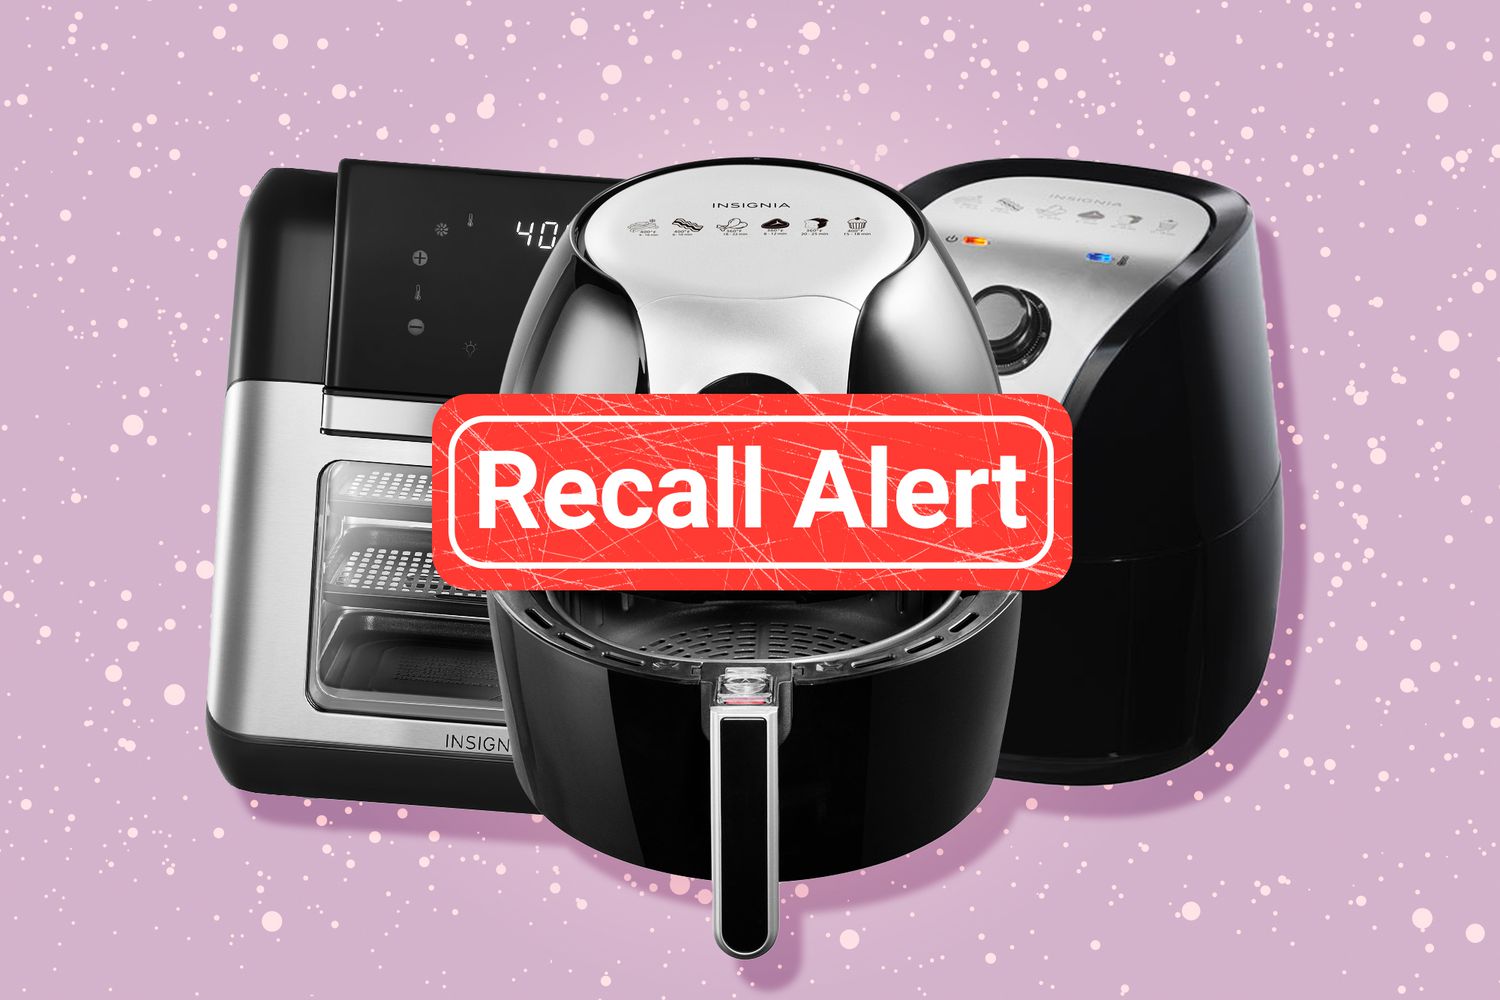 Insignia Recalls More Than 700,000 Air Fryers Due to Potential Fire